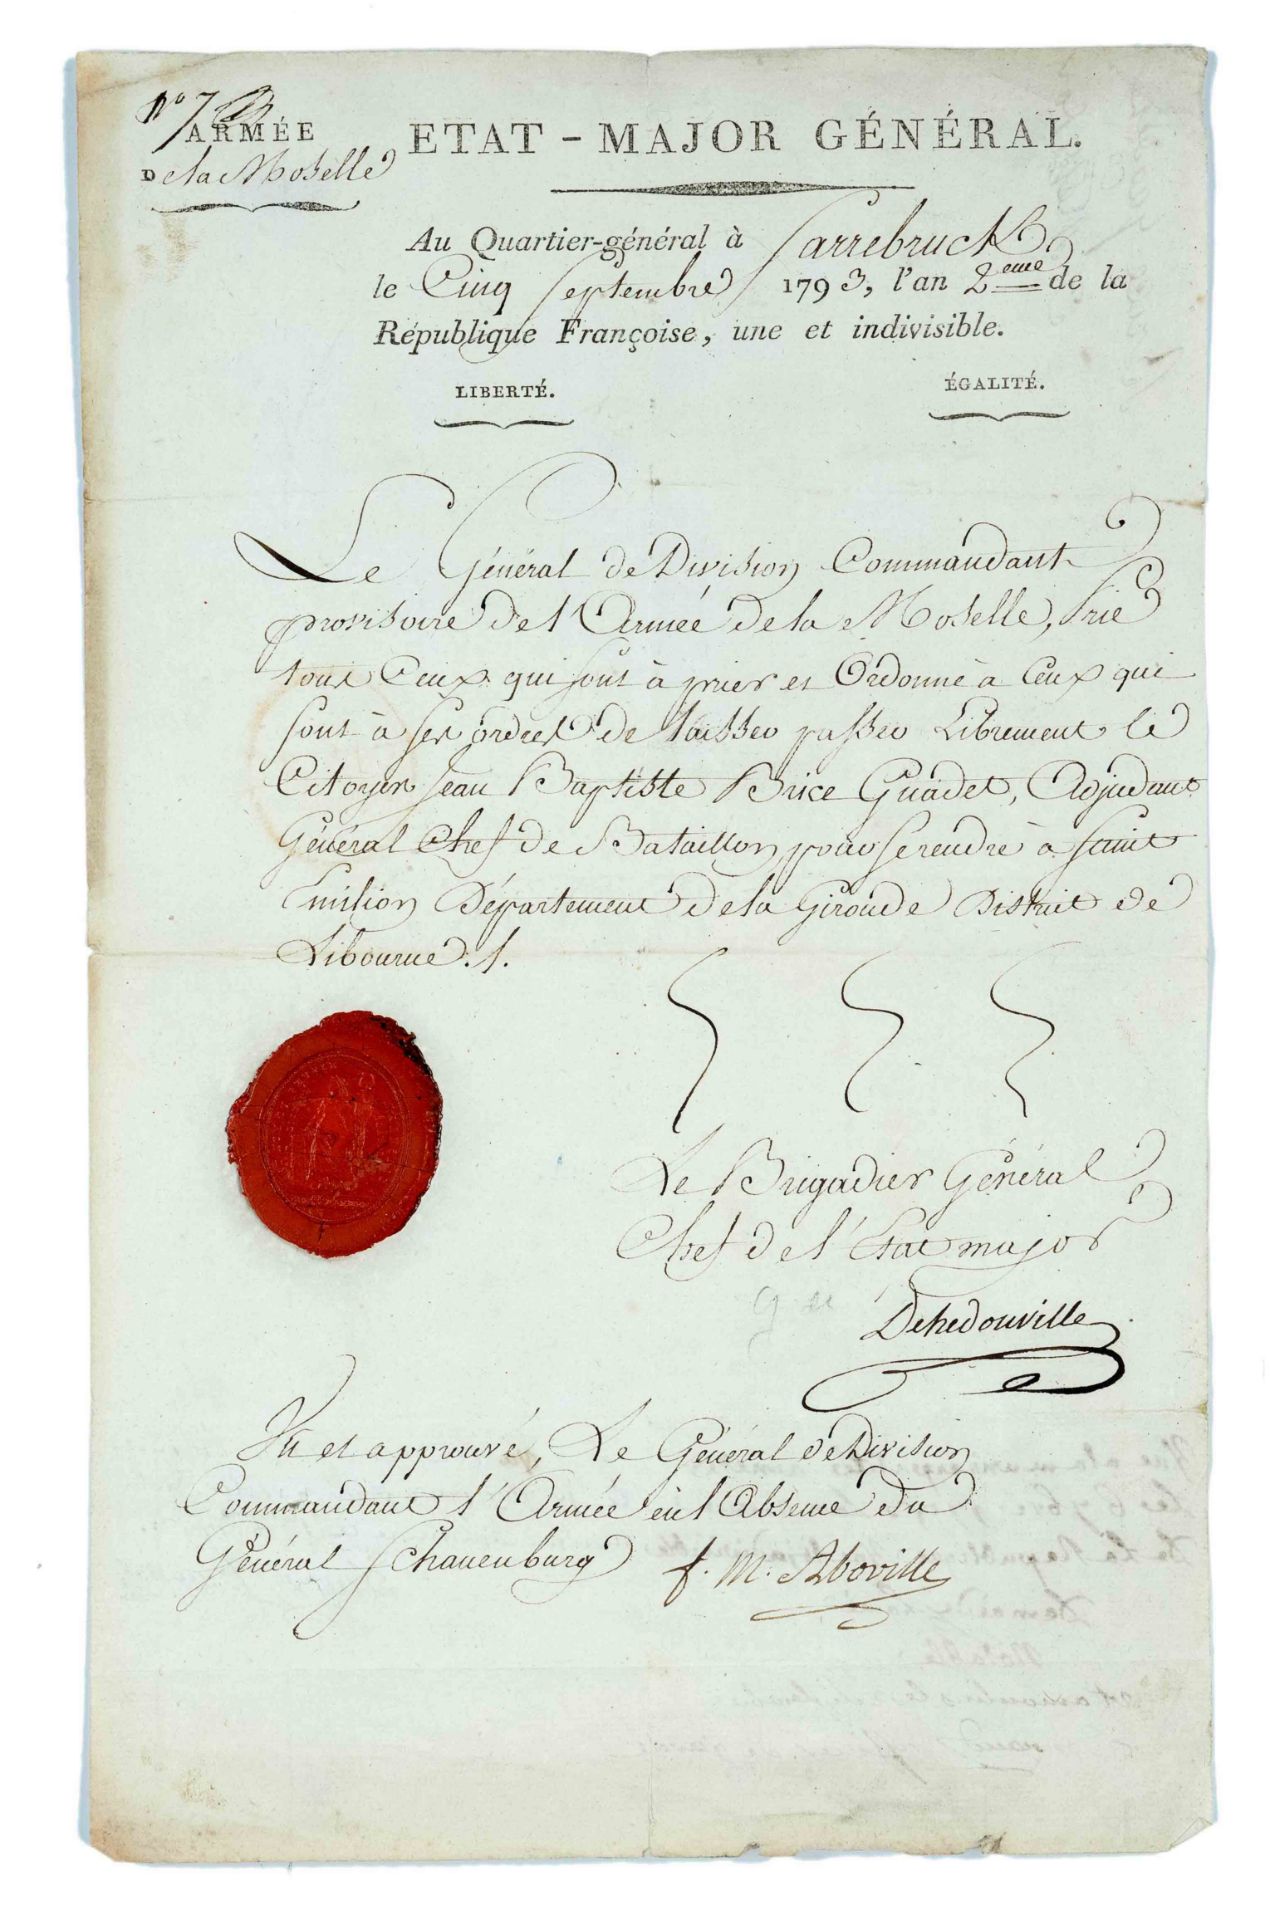 Letter of command probably of Major General Gabriel D'Hédouville (1755-1825) from 1793, paper